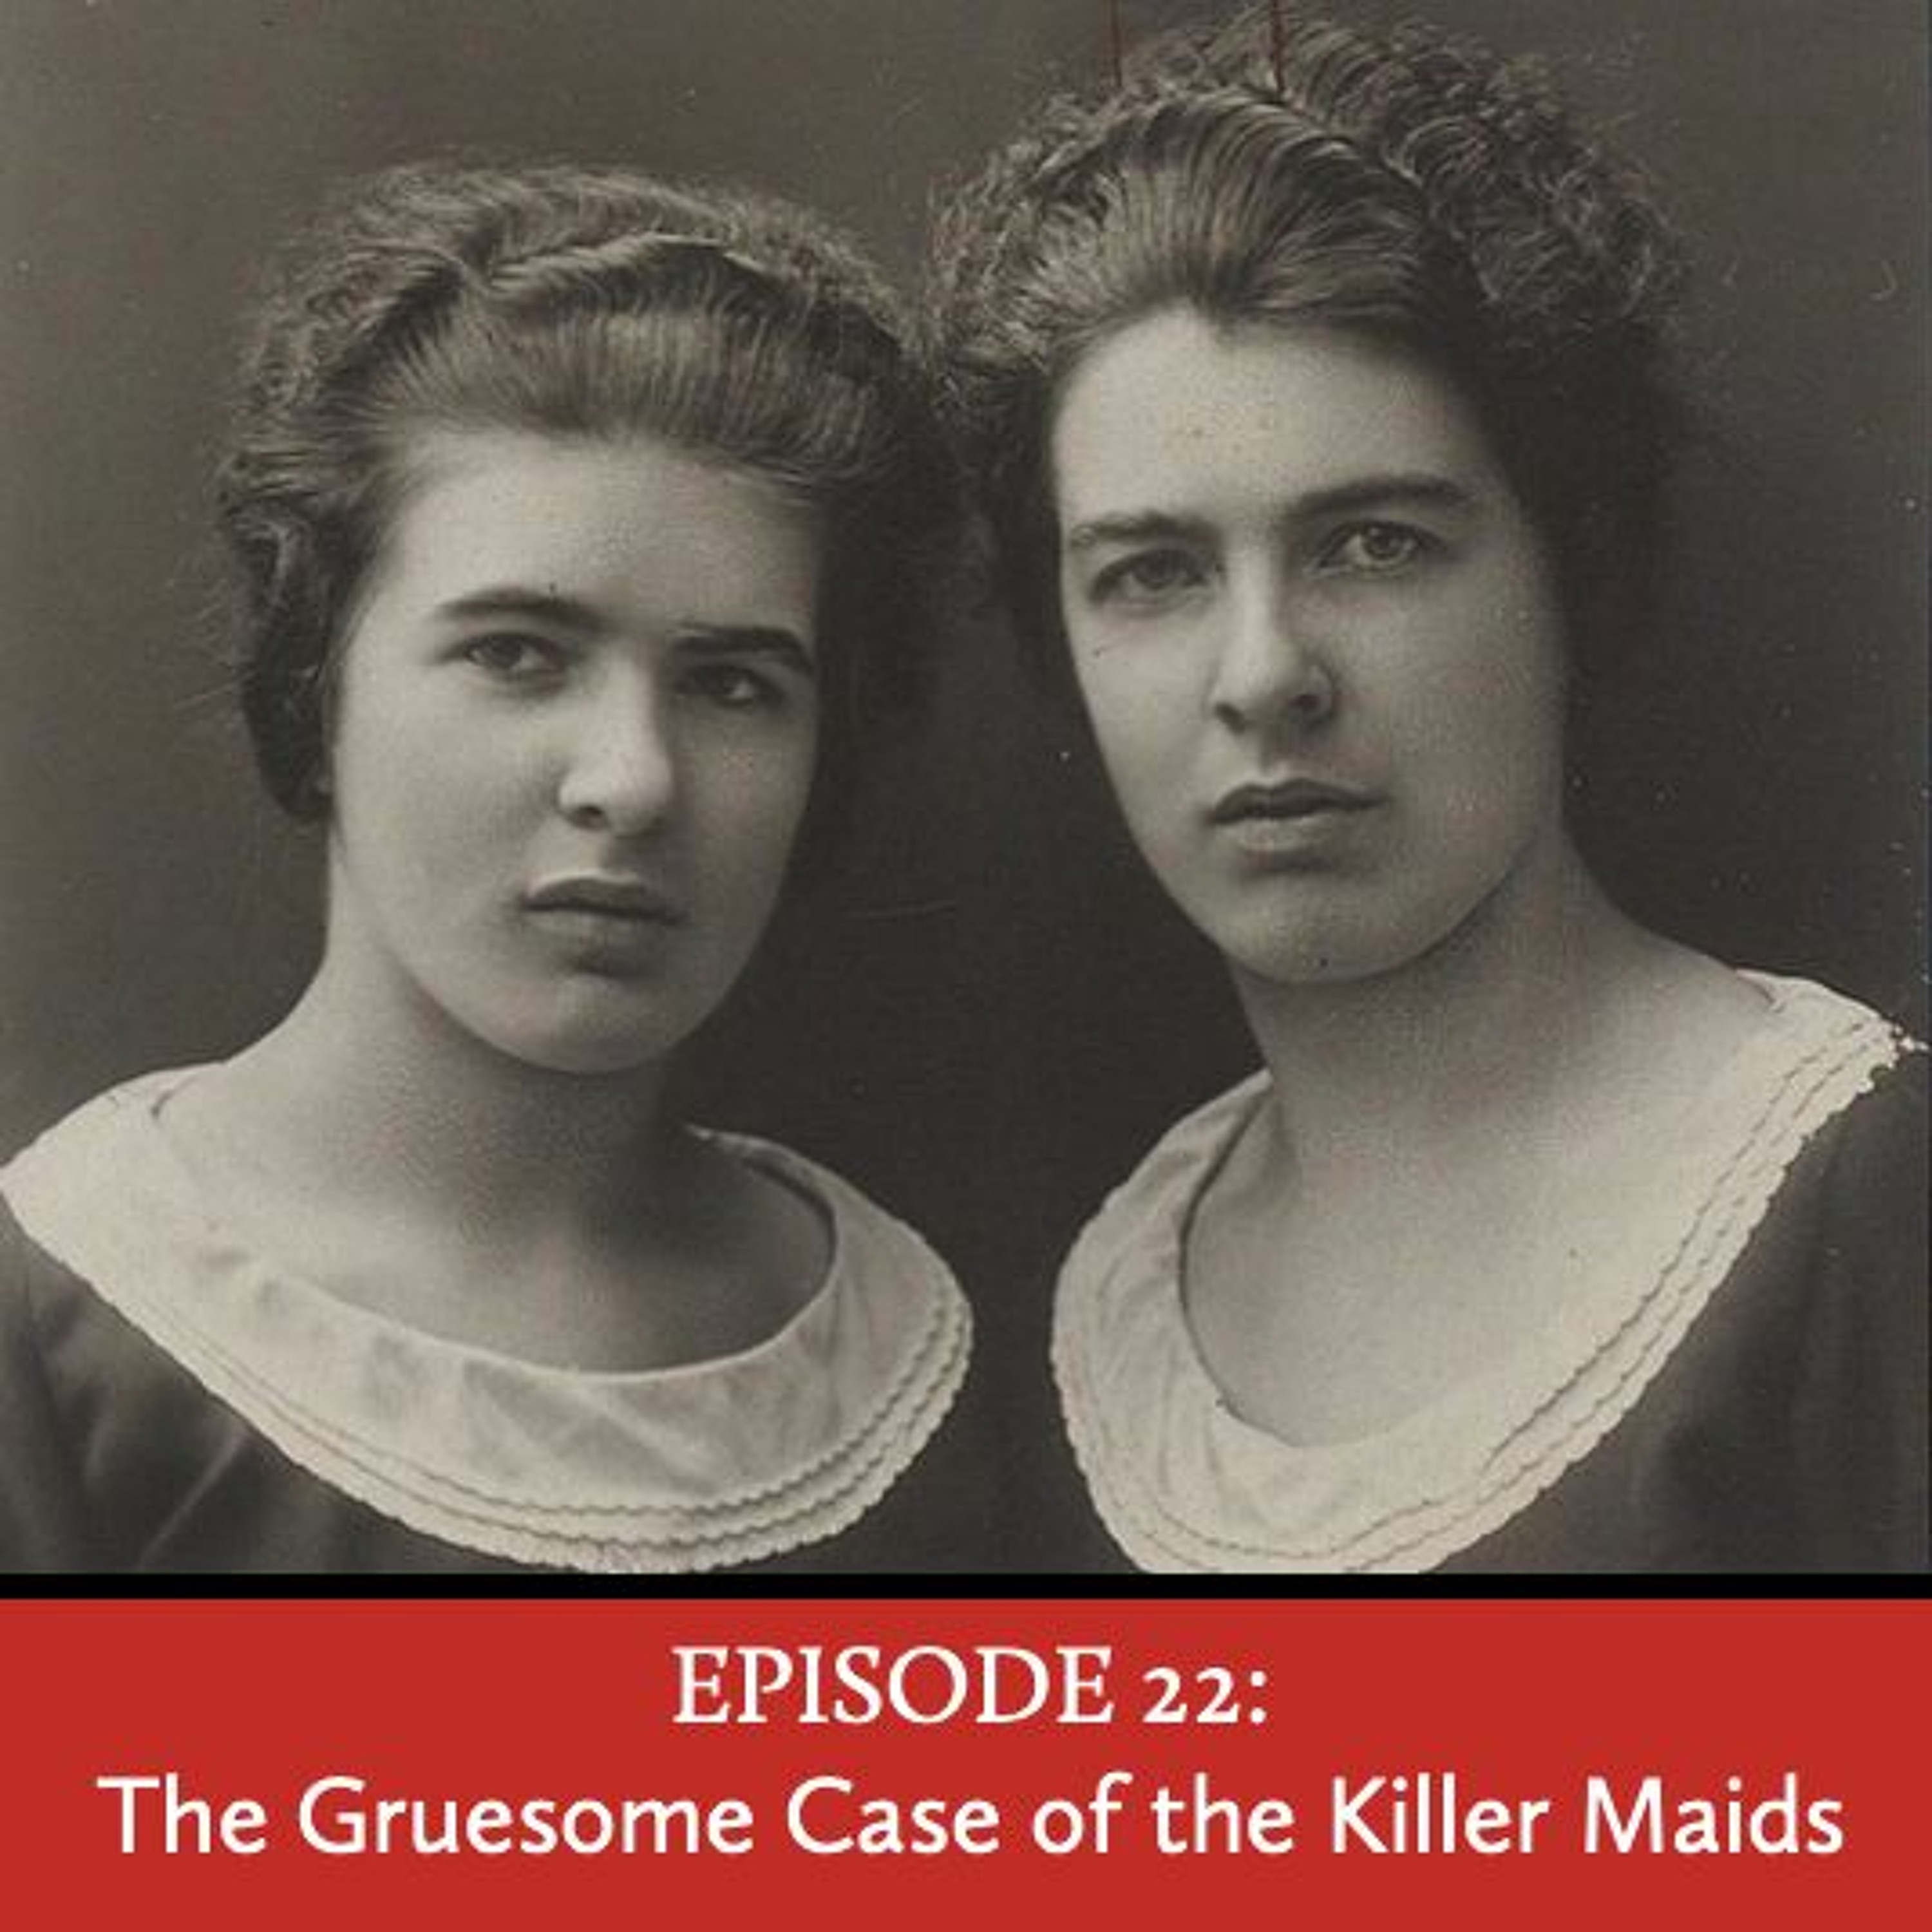 Episode 22: The Gruesome Case of the Killer Maids